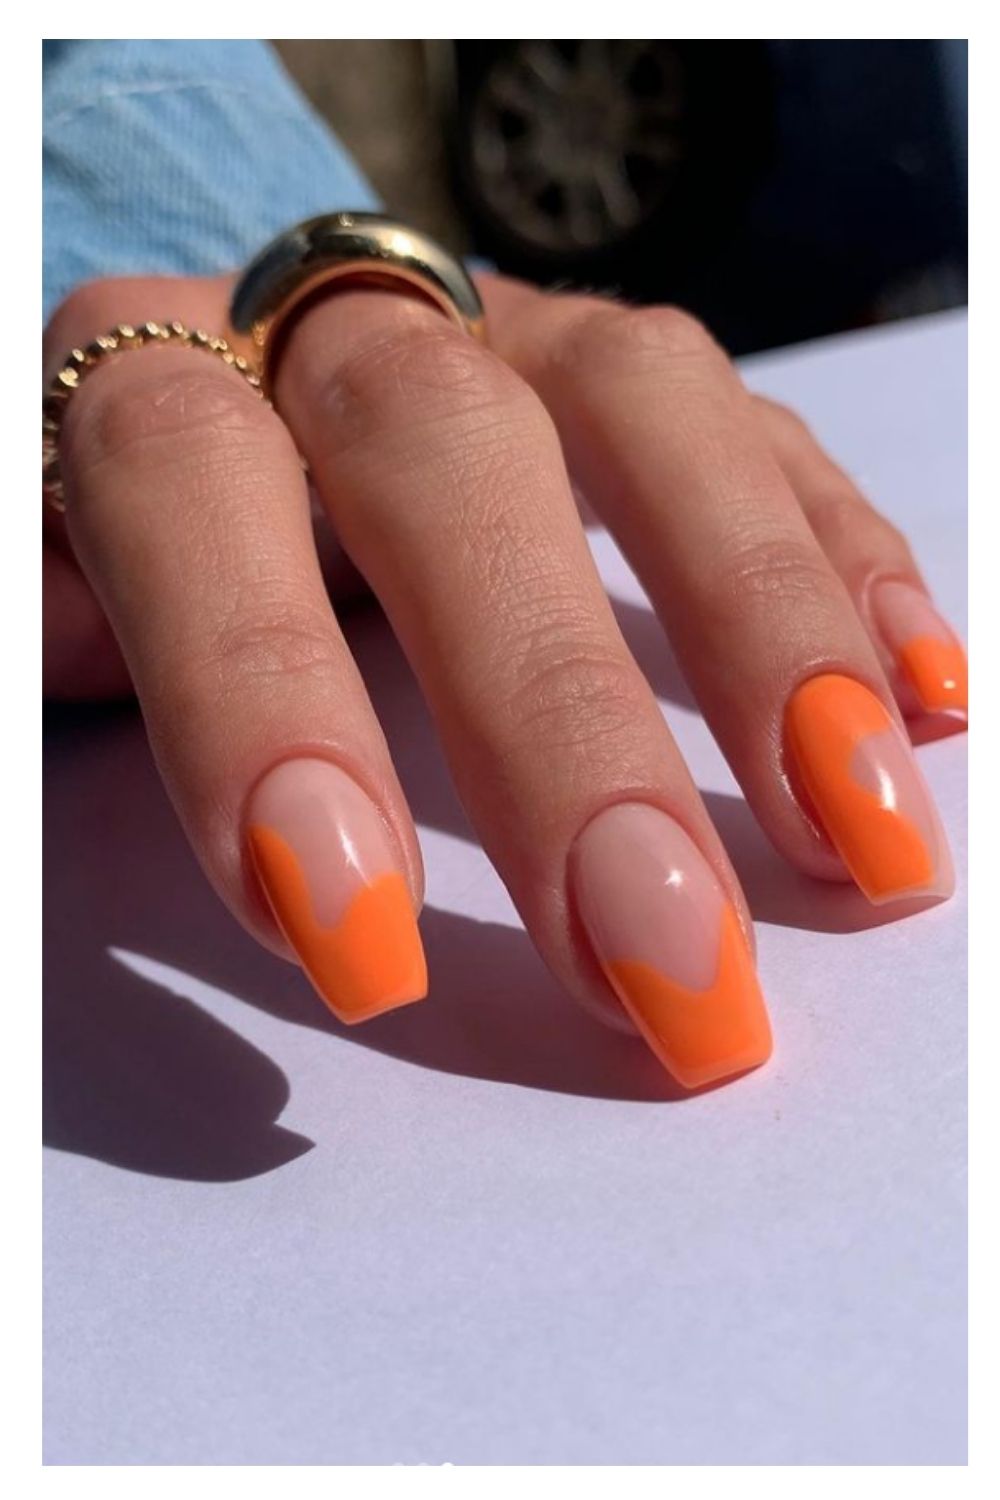 30 Best Summer Nail Designs and Ideas For April 2021